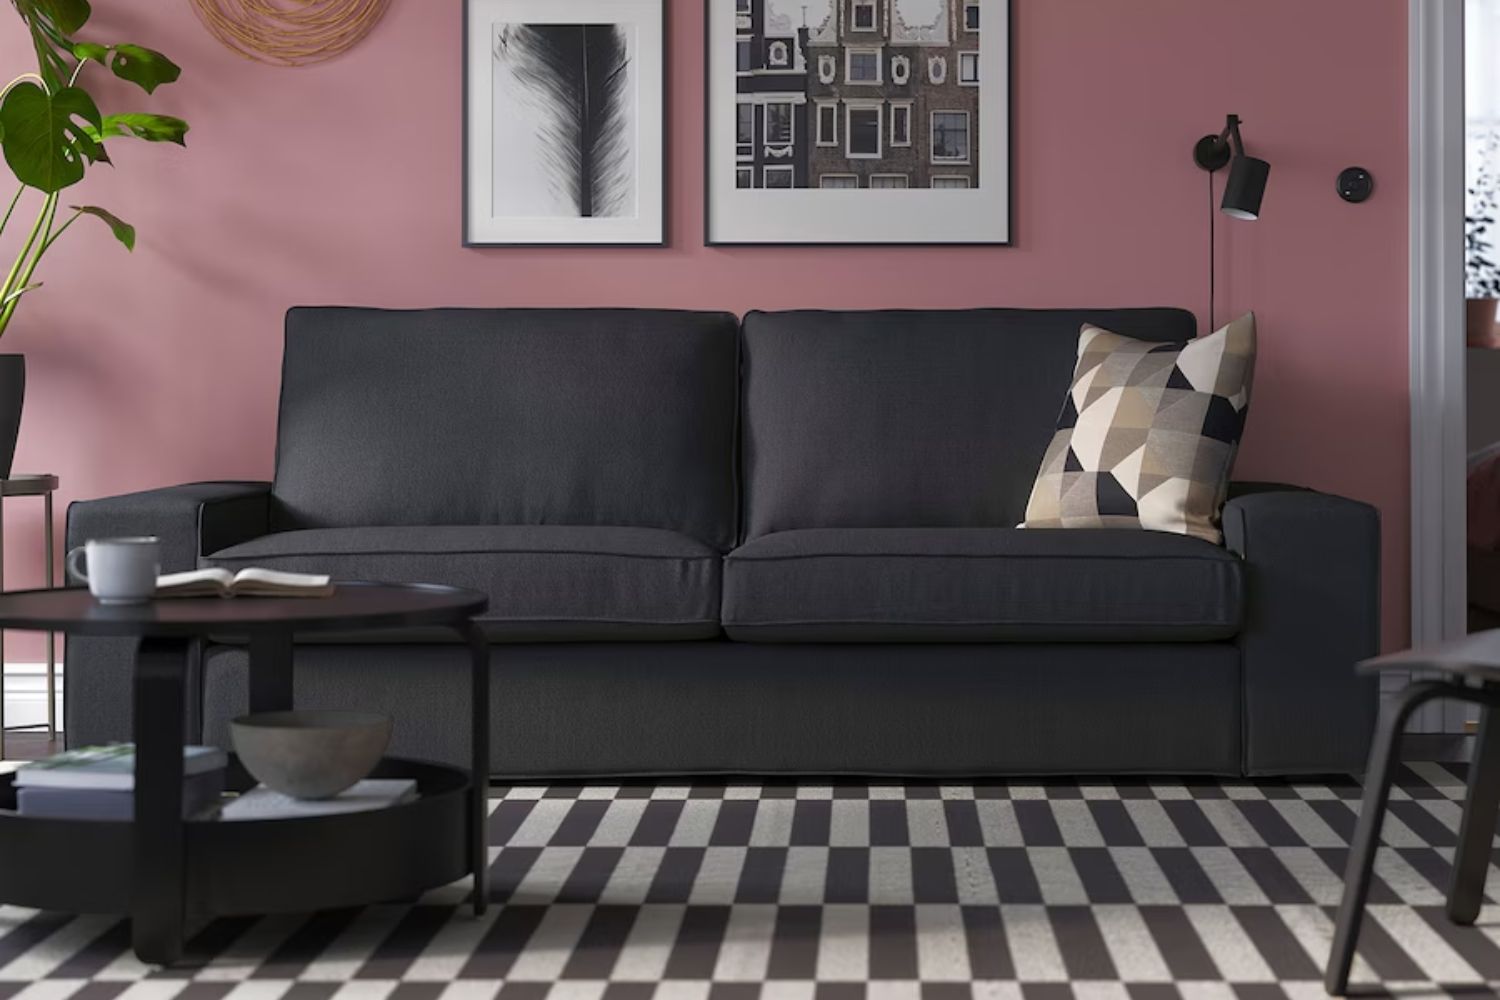 The Best Couches Under 1000 Options: Aiden Square Arm Sofa